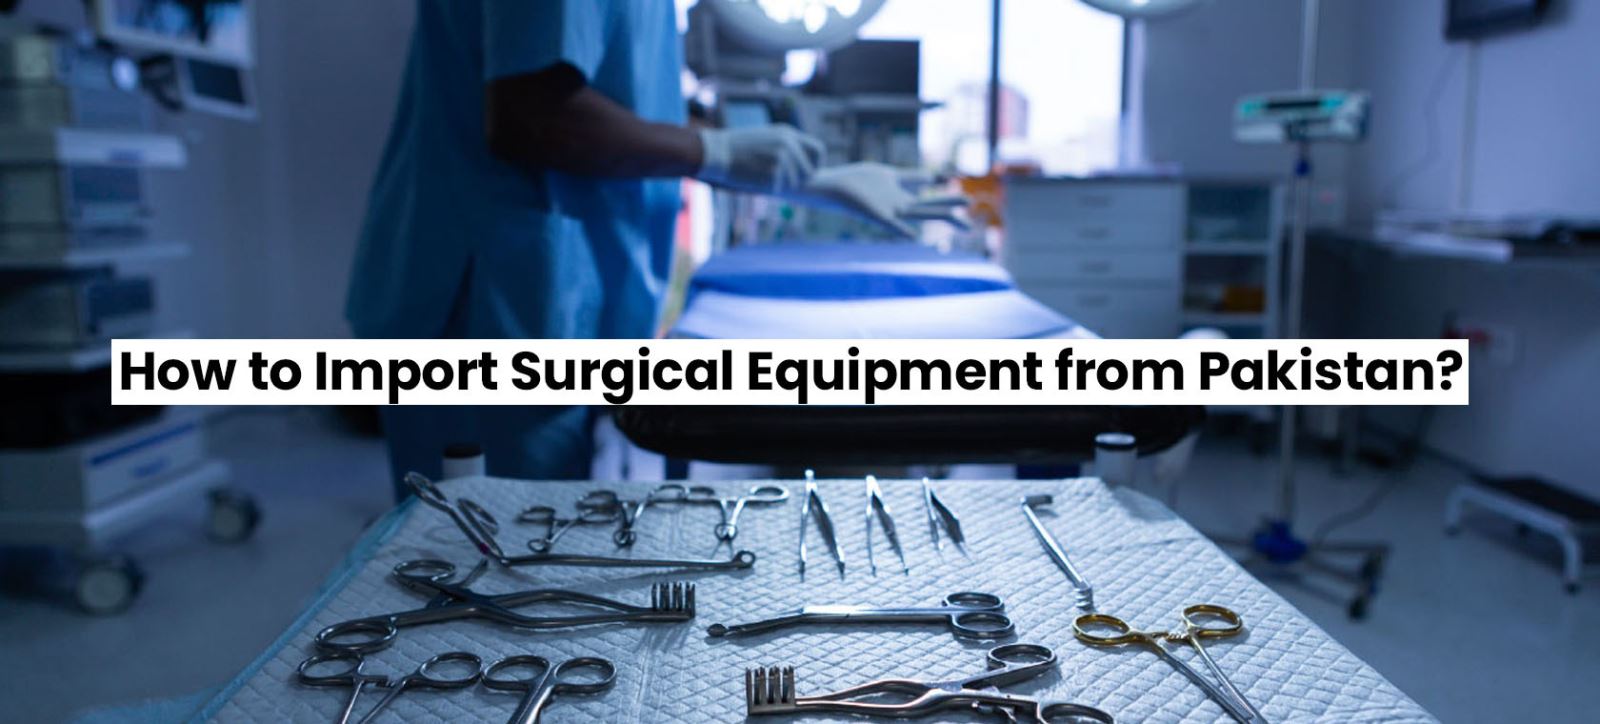 How to Import Surgical Equipment in Pakistan